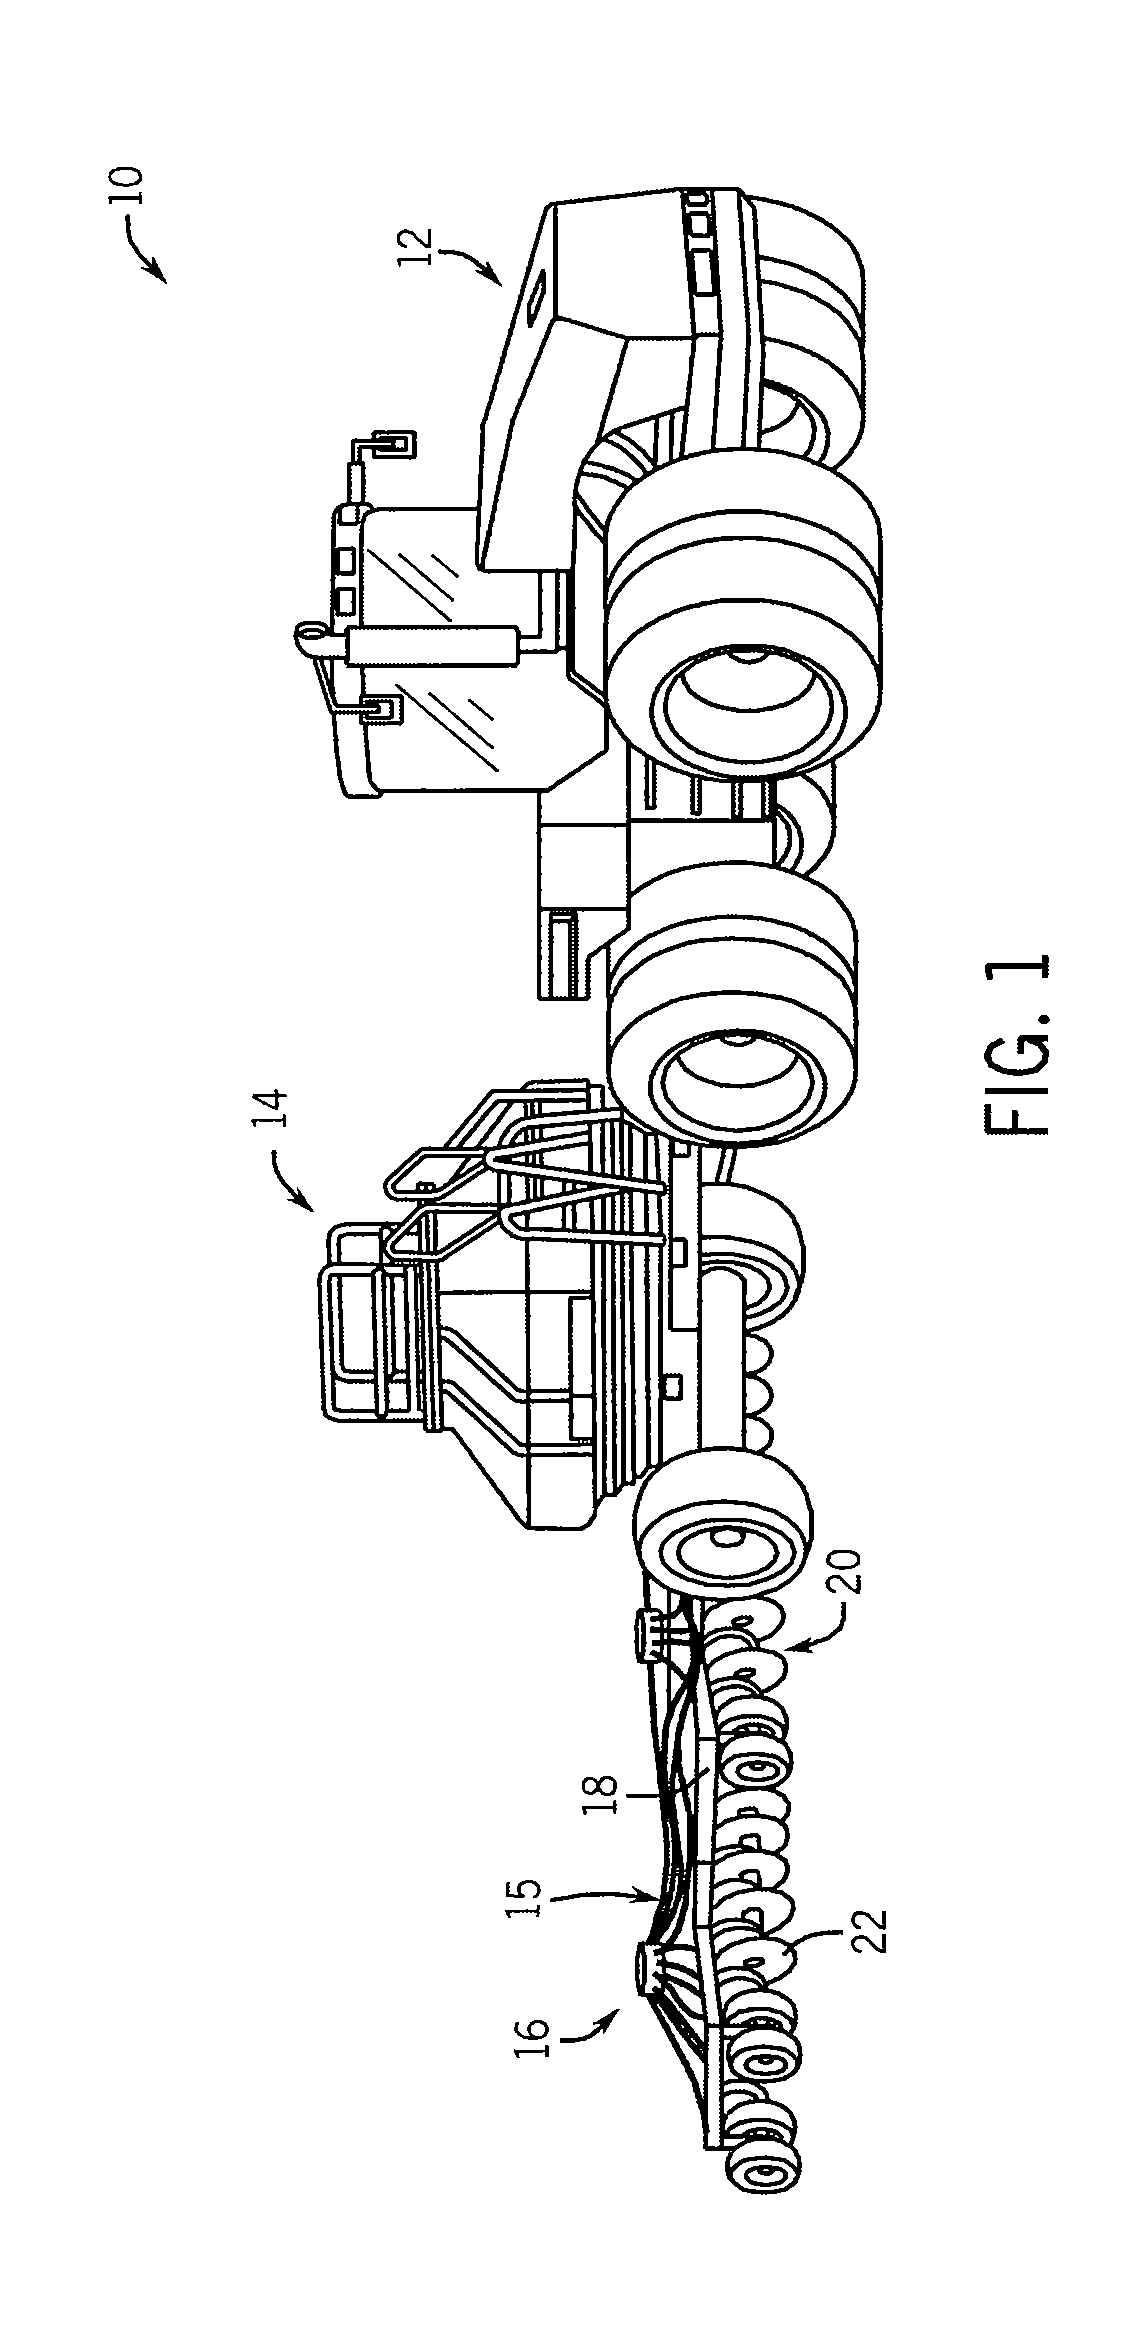 System And Method Of Tractor Control Based On Agricultural Implement Performance